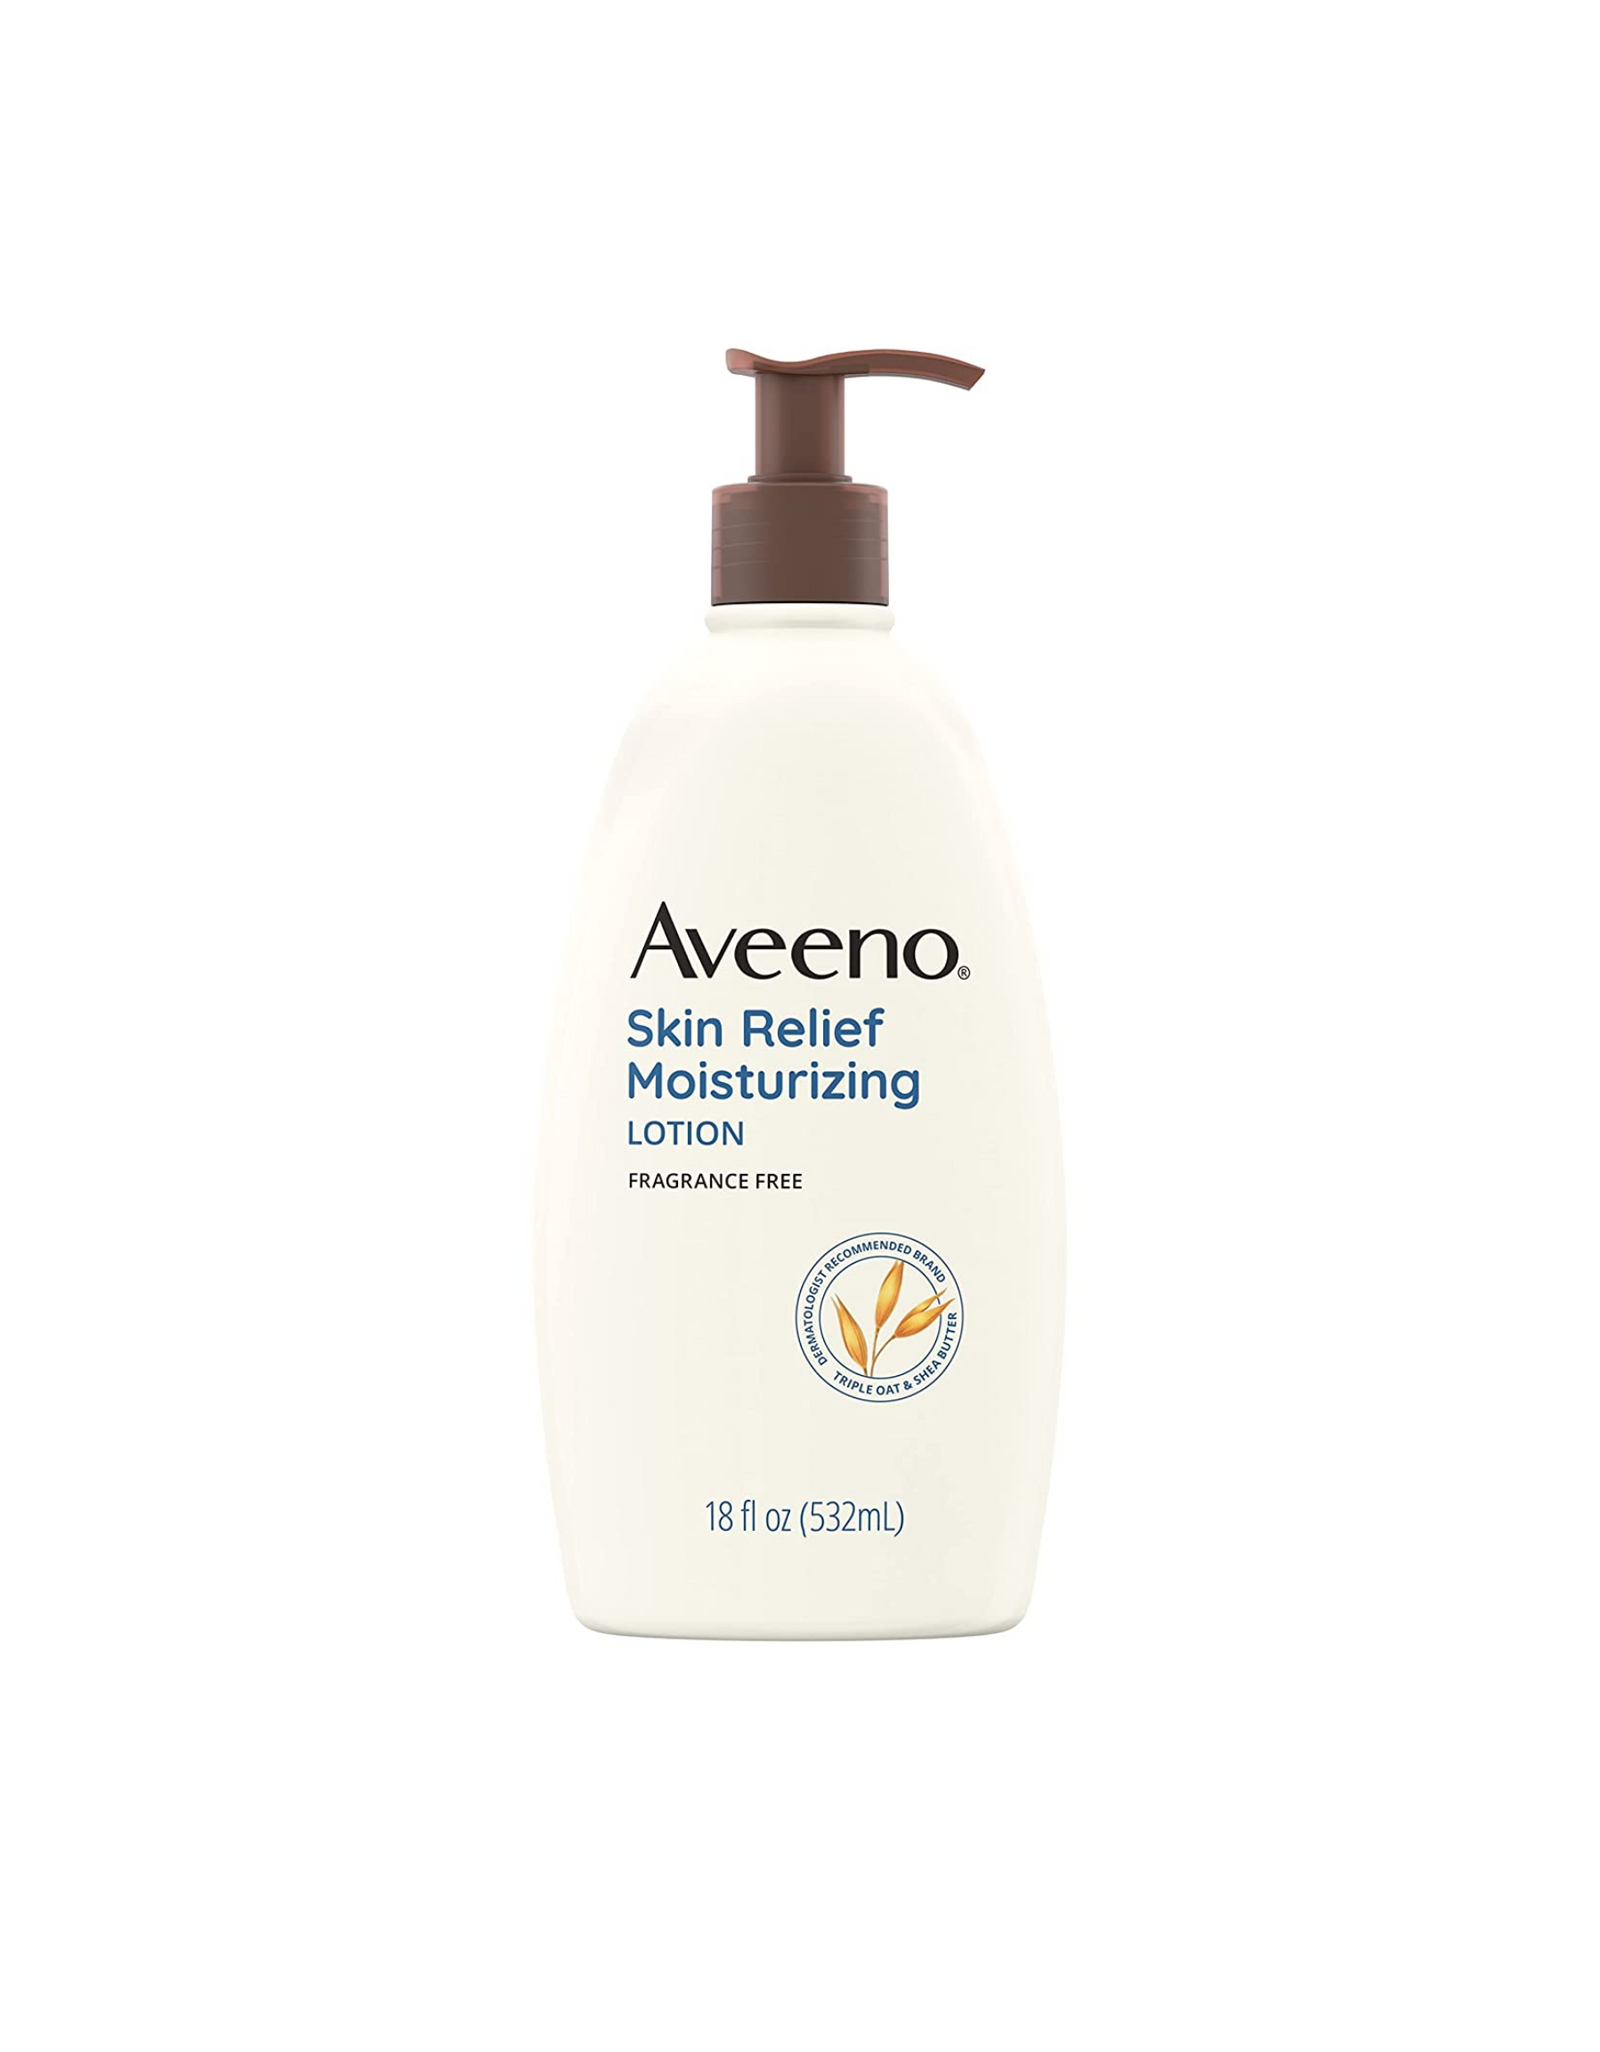 Aveeno Skin Relief Fragrance-Free Moisturizing Lotion for Sensitive Skin with Triple Oat Complex & Natural Shea Butter, 18 fl oz